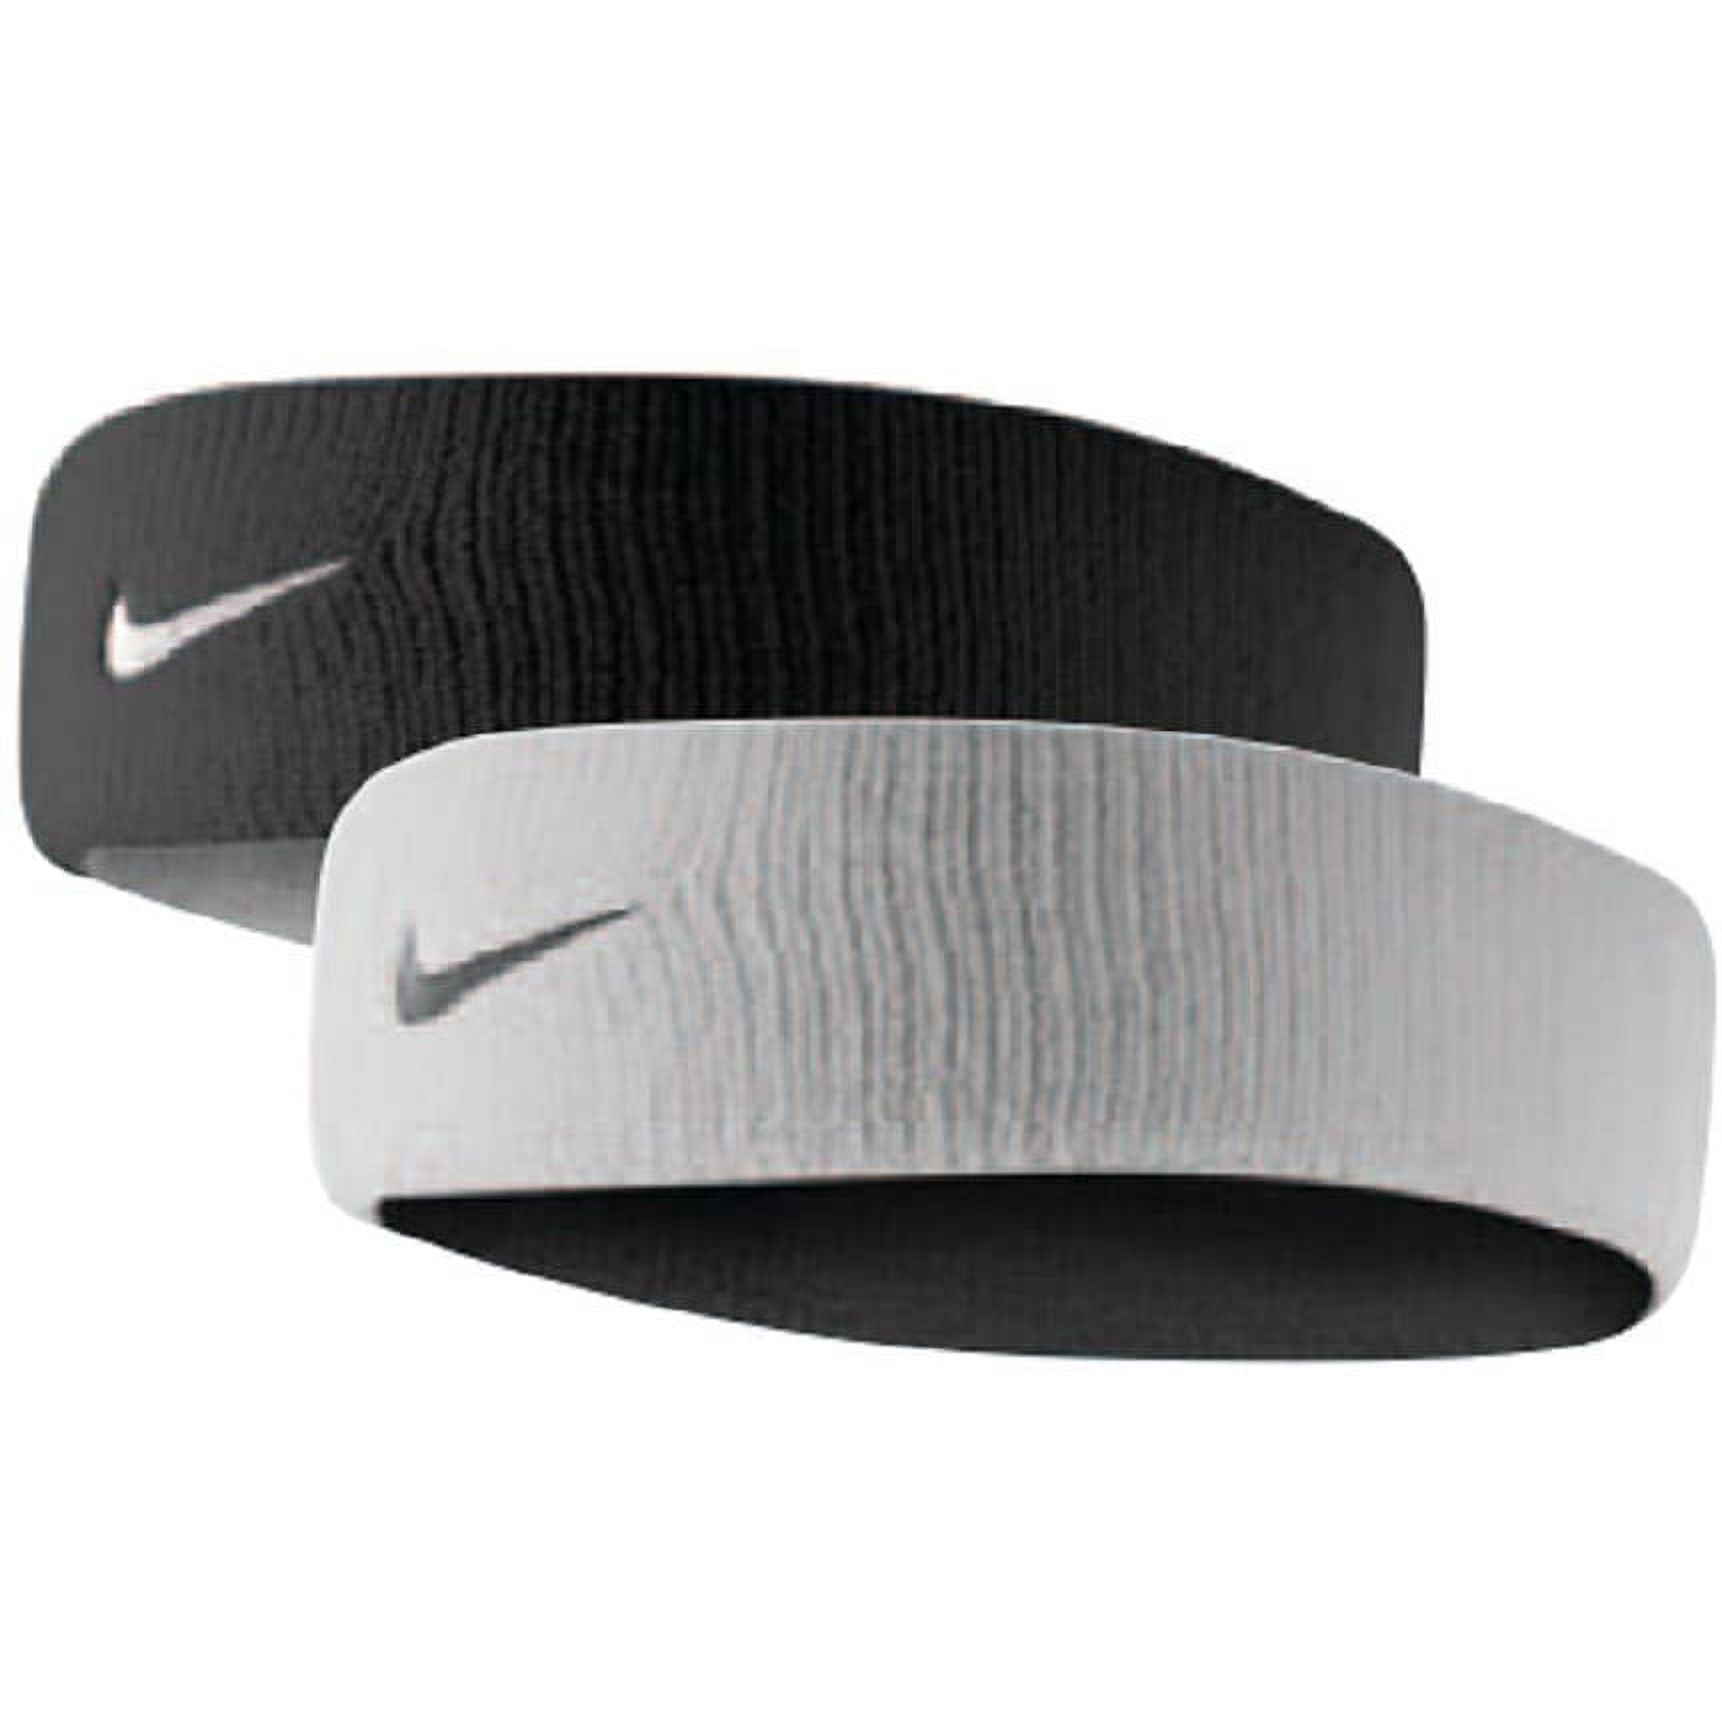 Nike Dri-Fit Home & Away Headband (One Size Fits Most, Black/Base Grey) - image 1 of 2